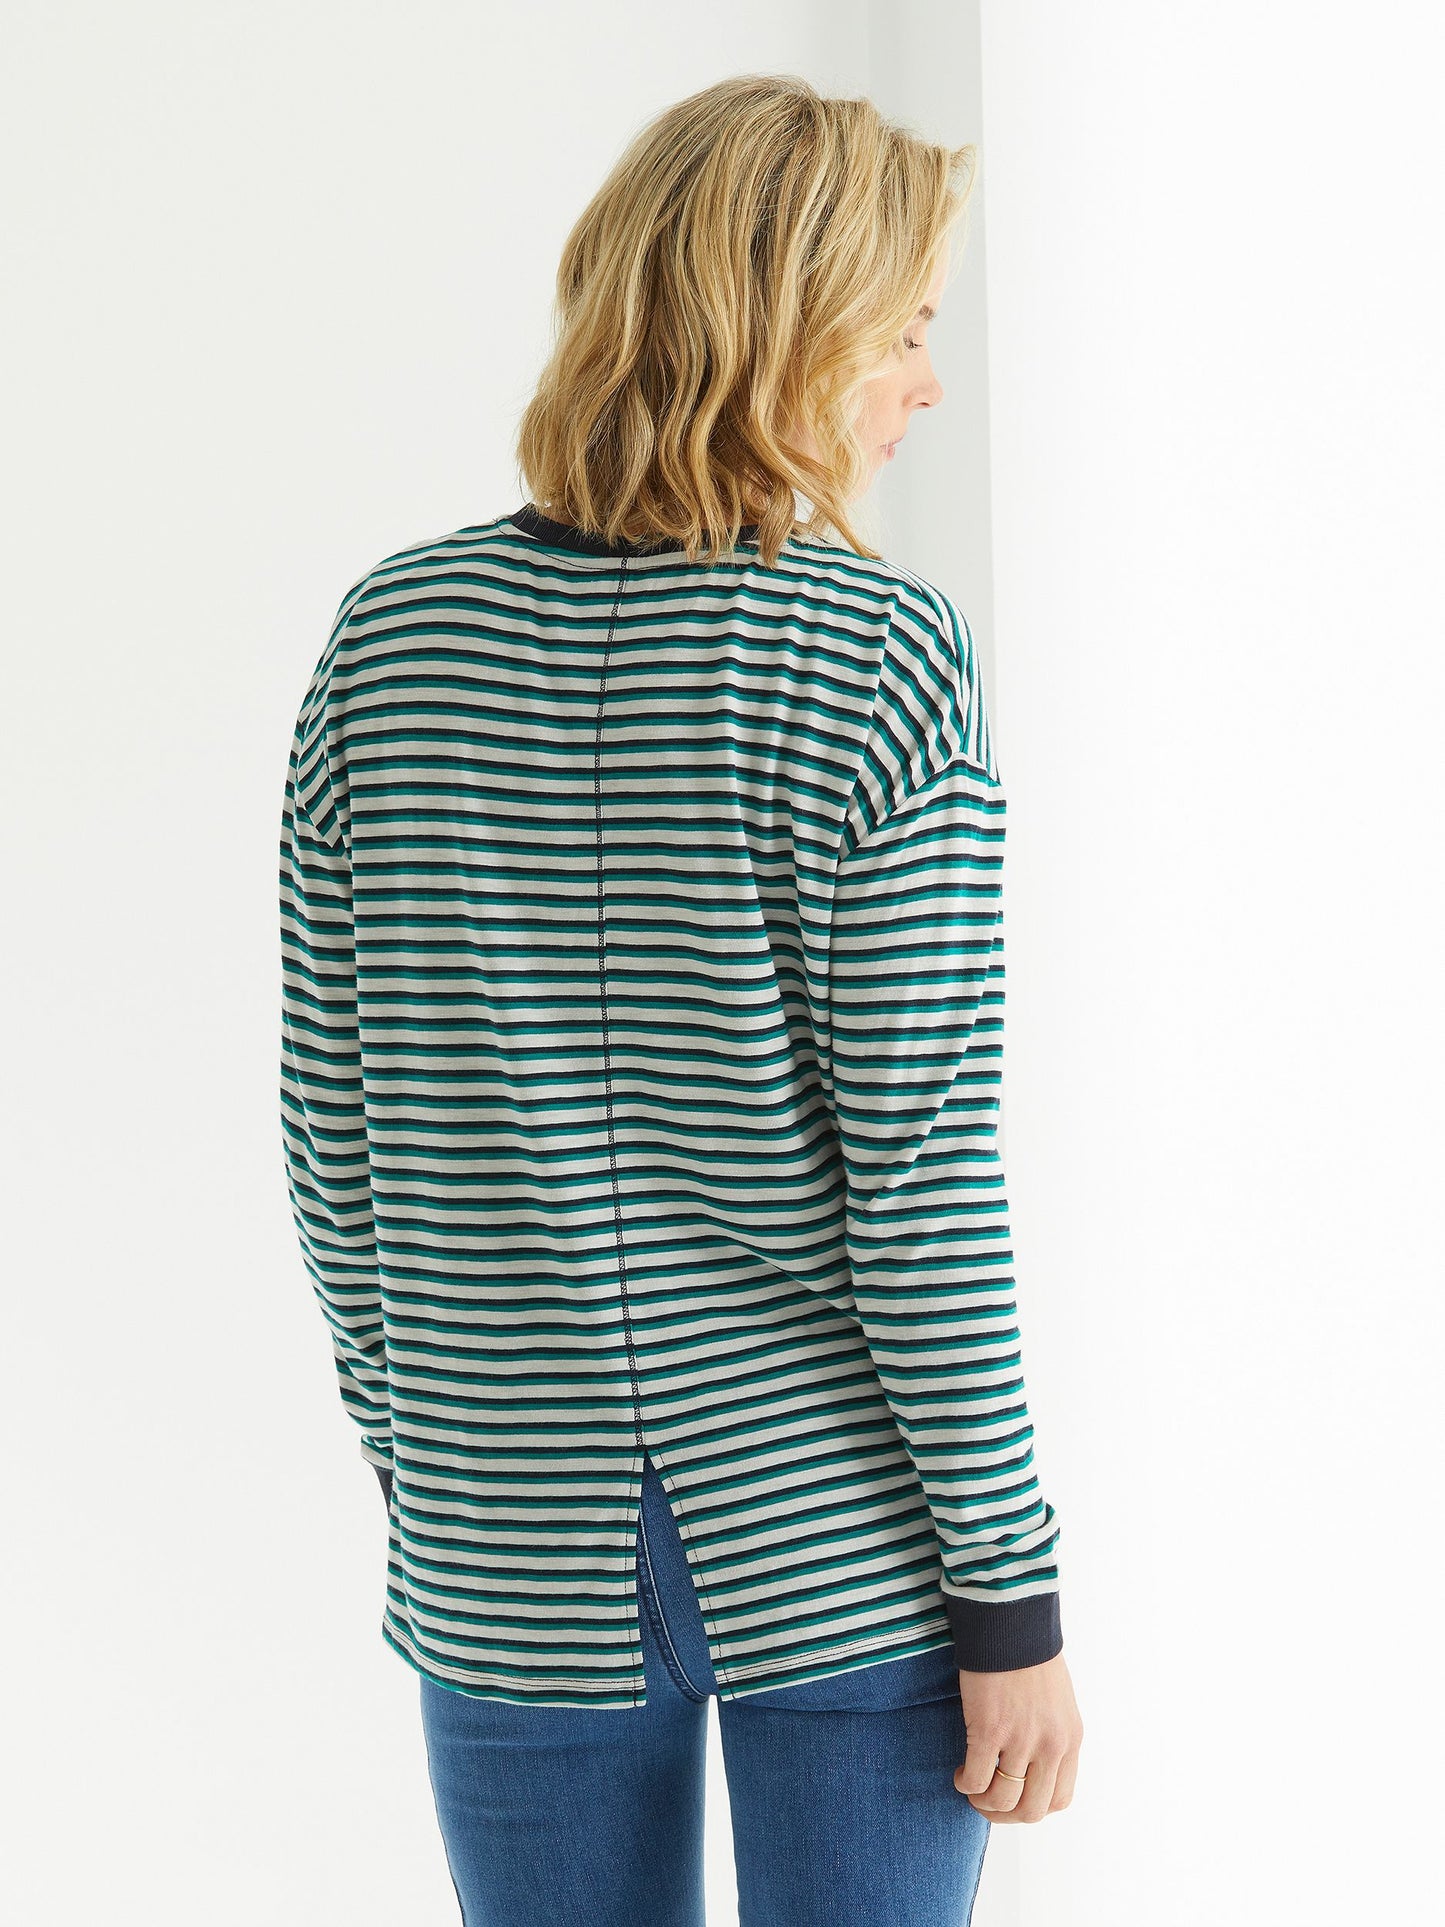 Marco Polo L/S RELAXED | EMERALD MP7320